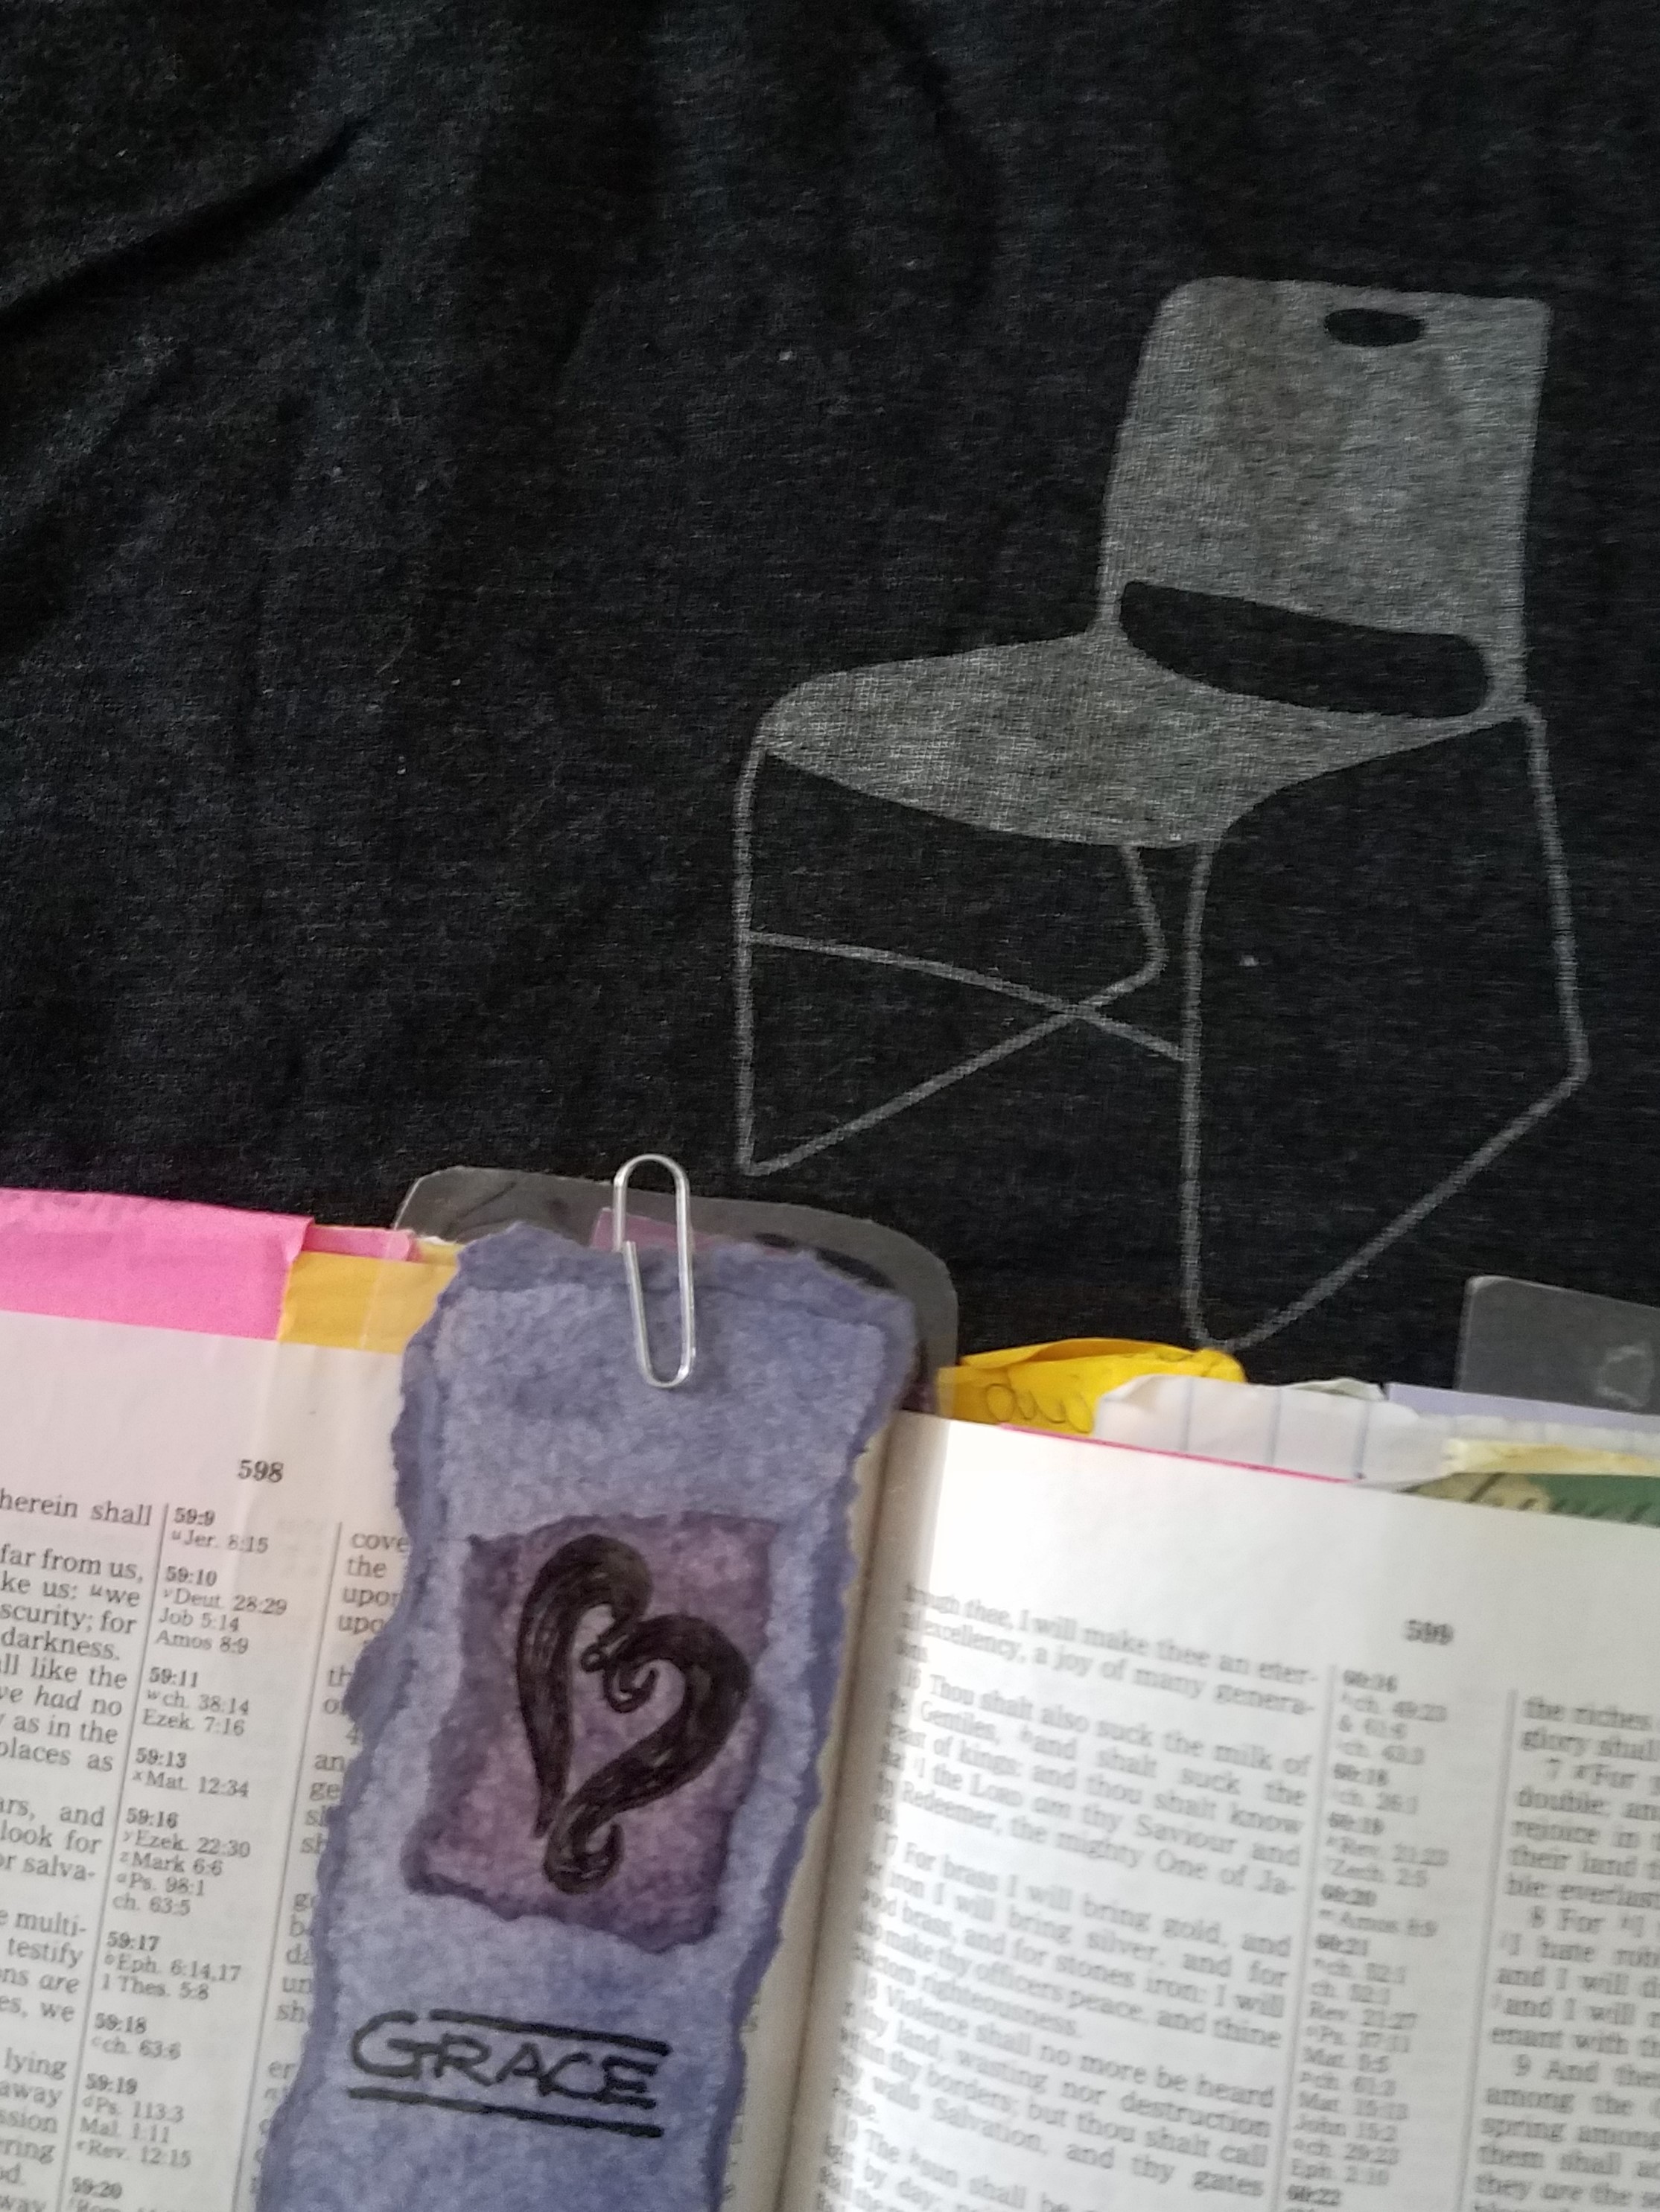 word weavers chair pic and my bible cropped